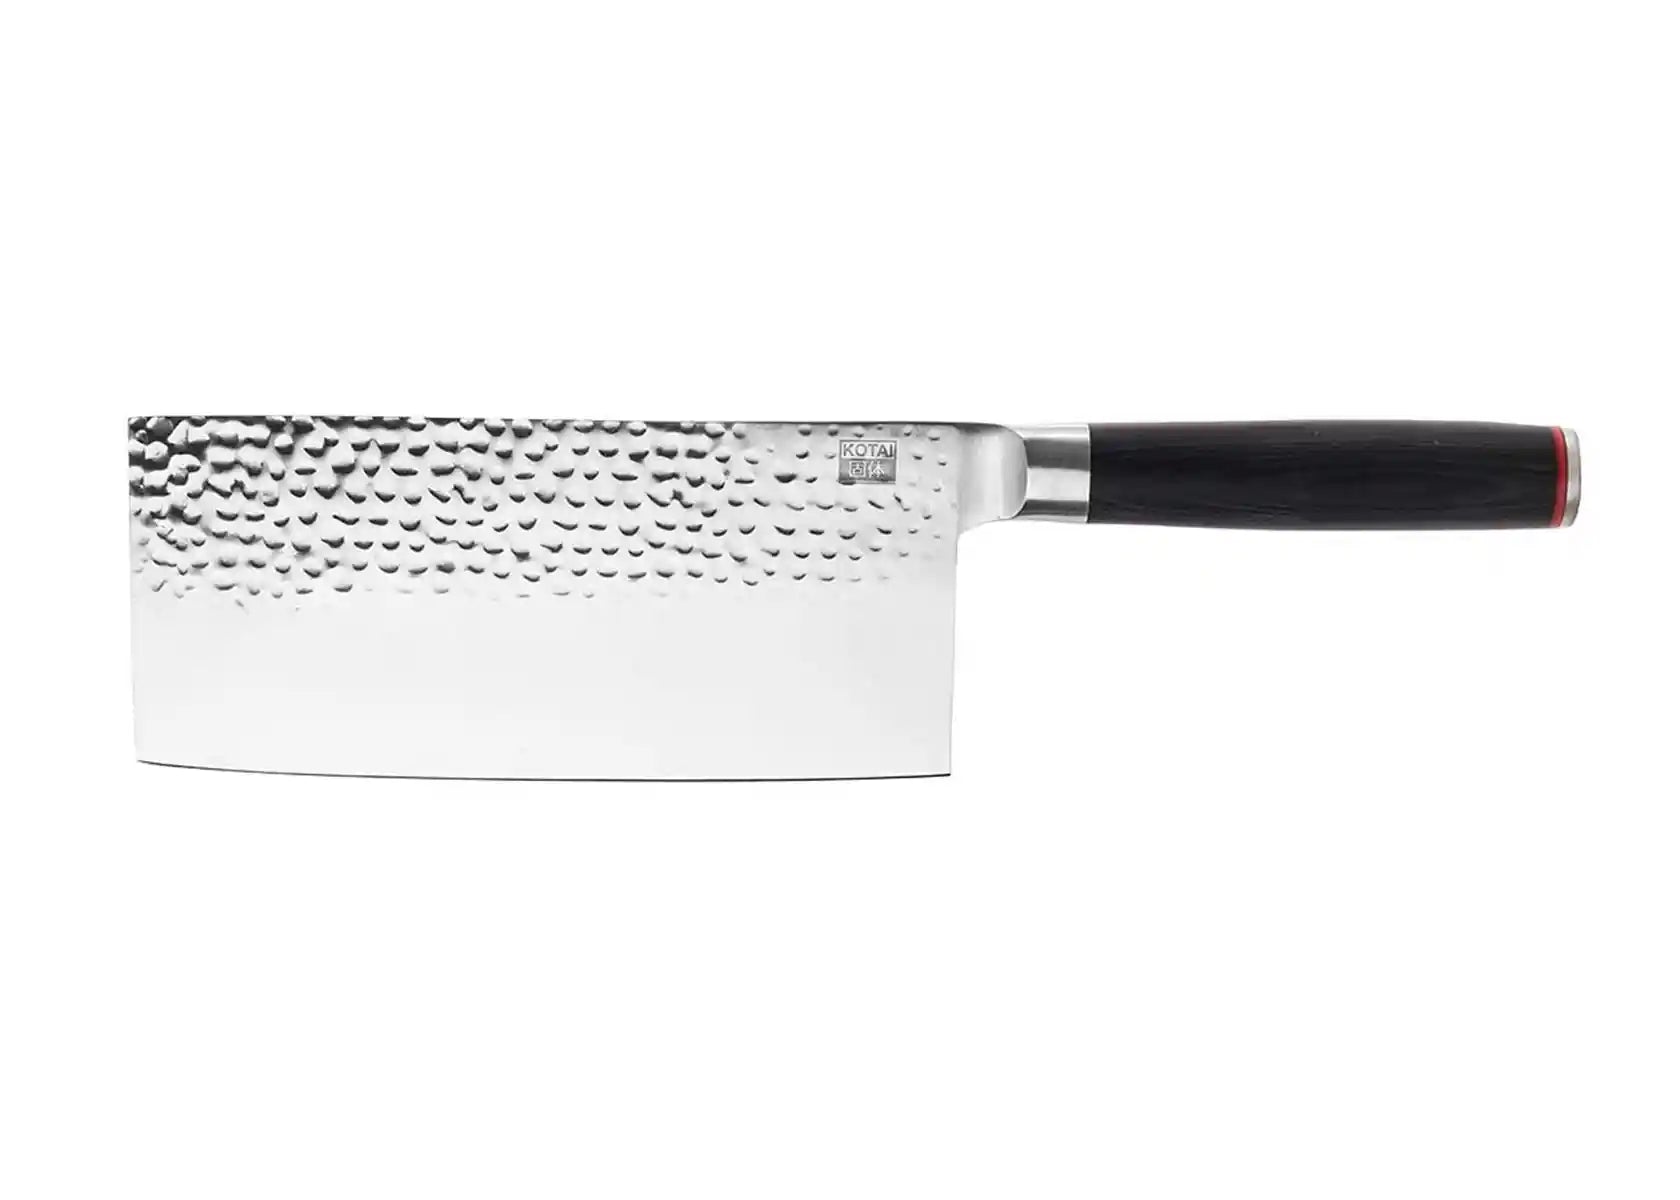 Cleaver (Chinese Chef's Knife) - Pakka Collection - 190 mm blade